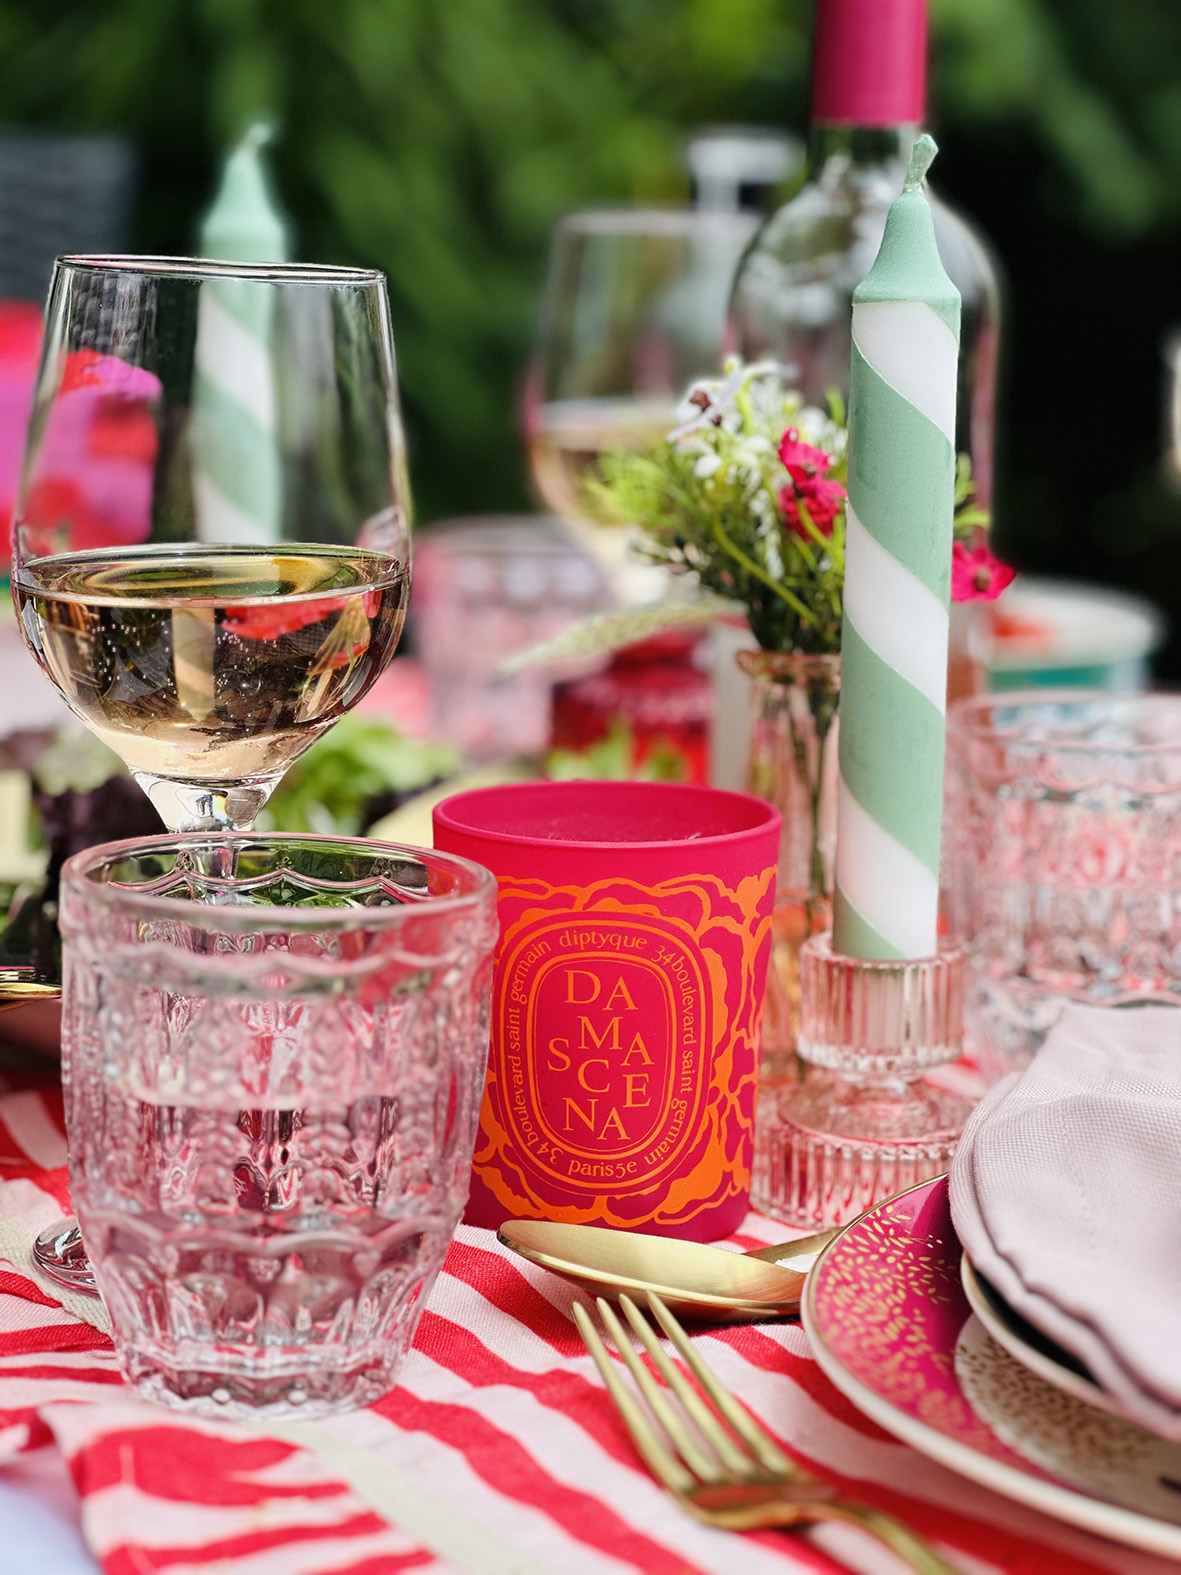 Diptyque candle on al fresco dining tablescape designed by Emma Green